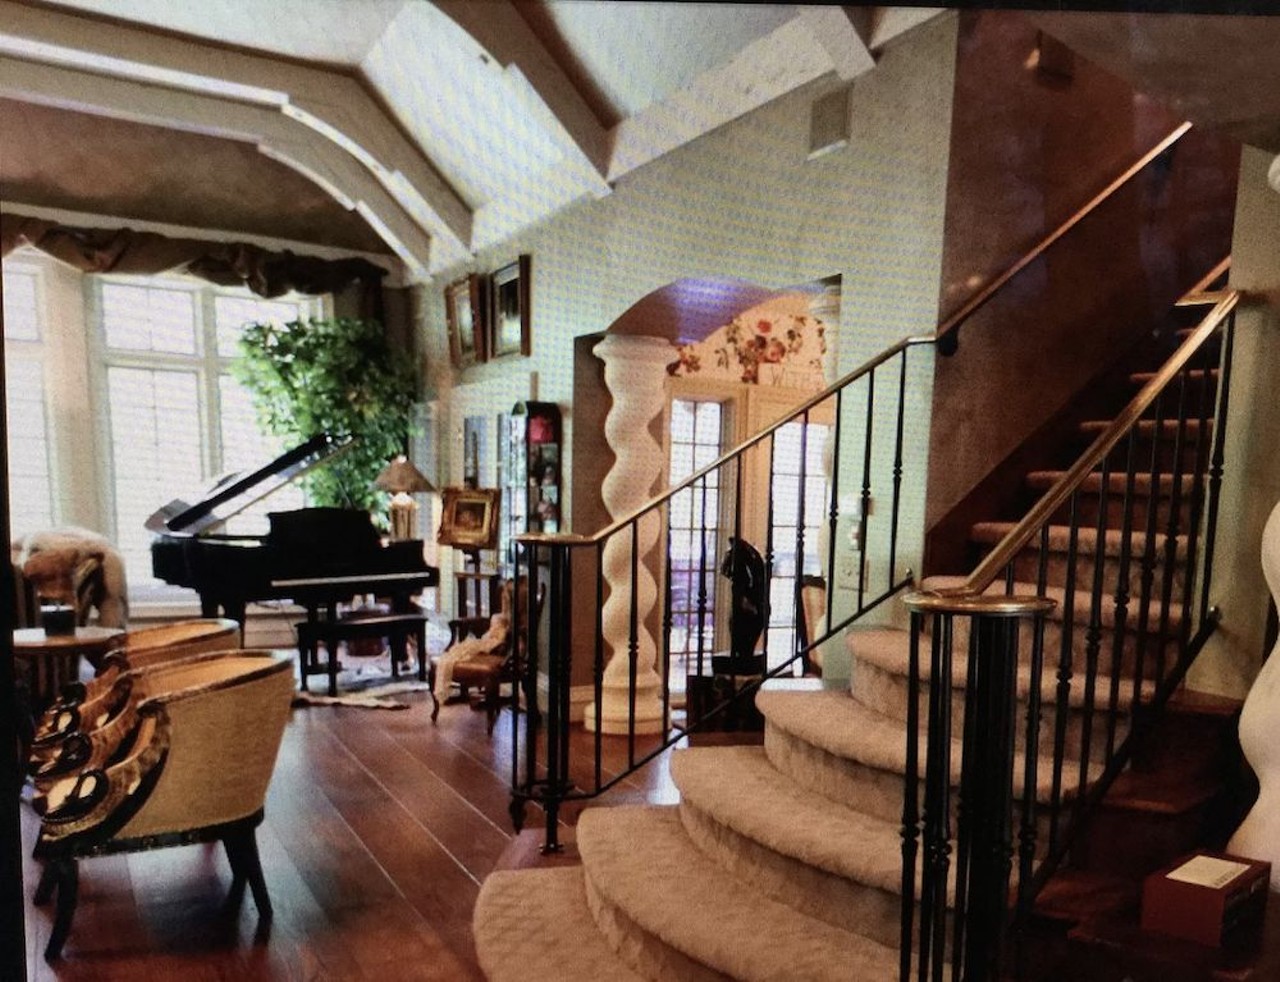 This $1.65 million Clarkston mansion has a garage with a turntable